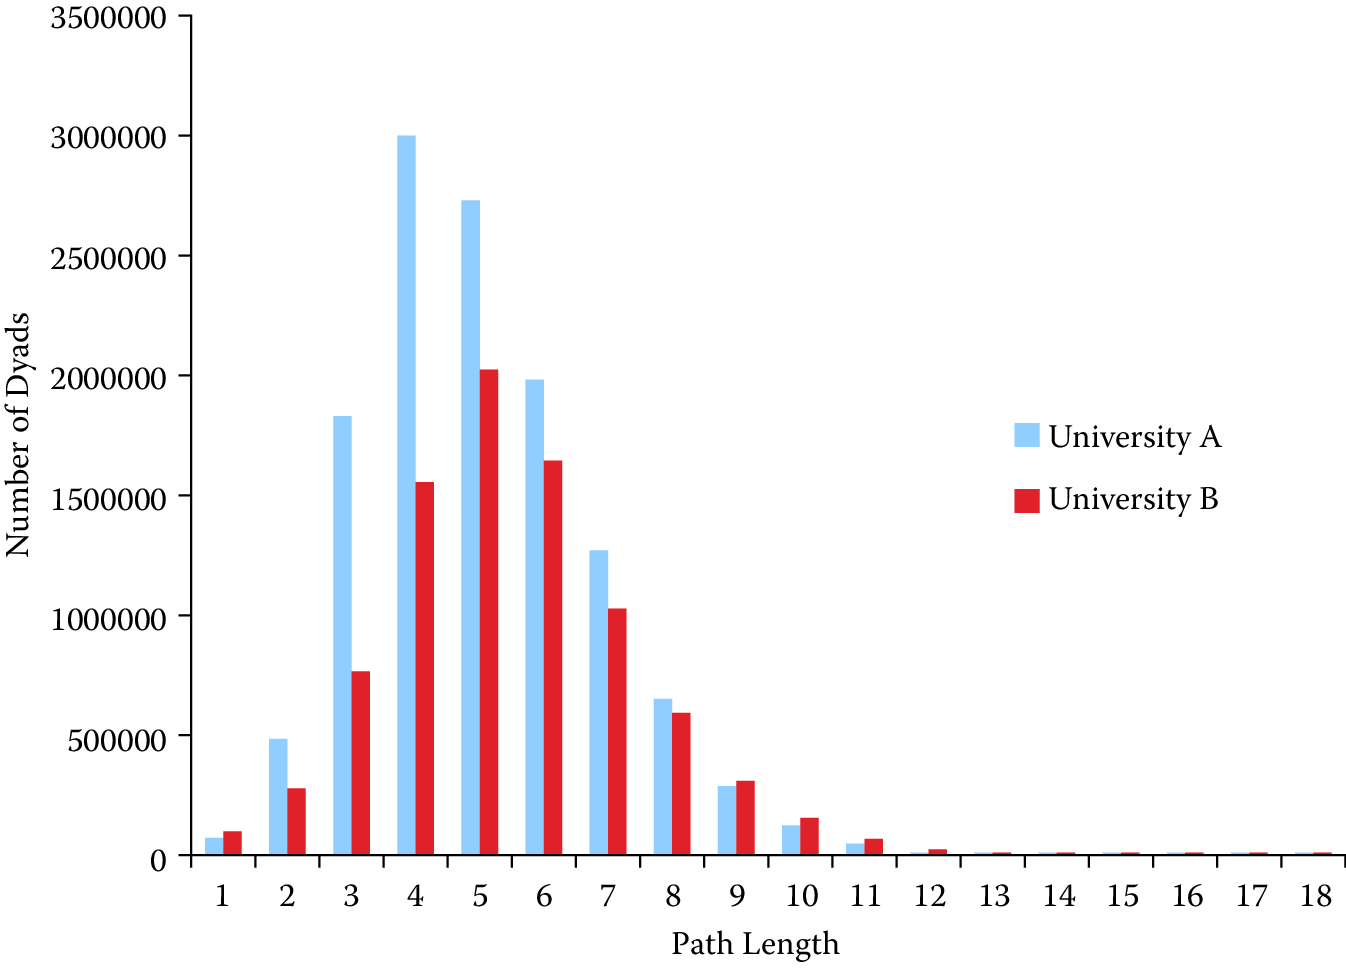 Distribution of path lengths for universities A and B